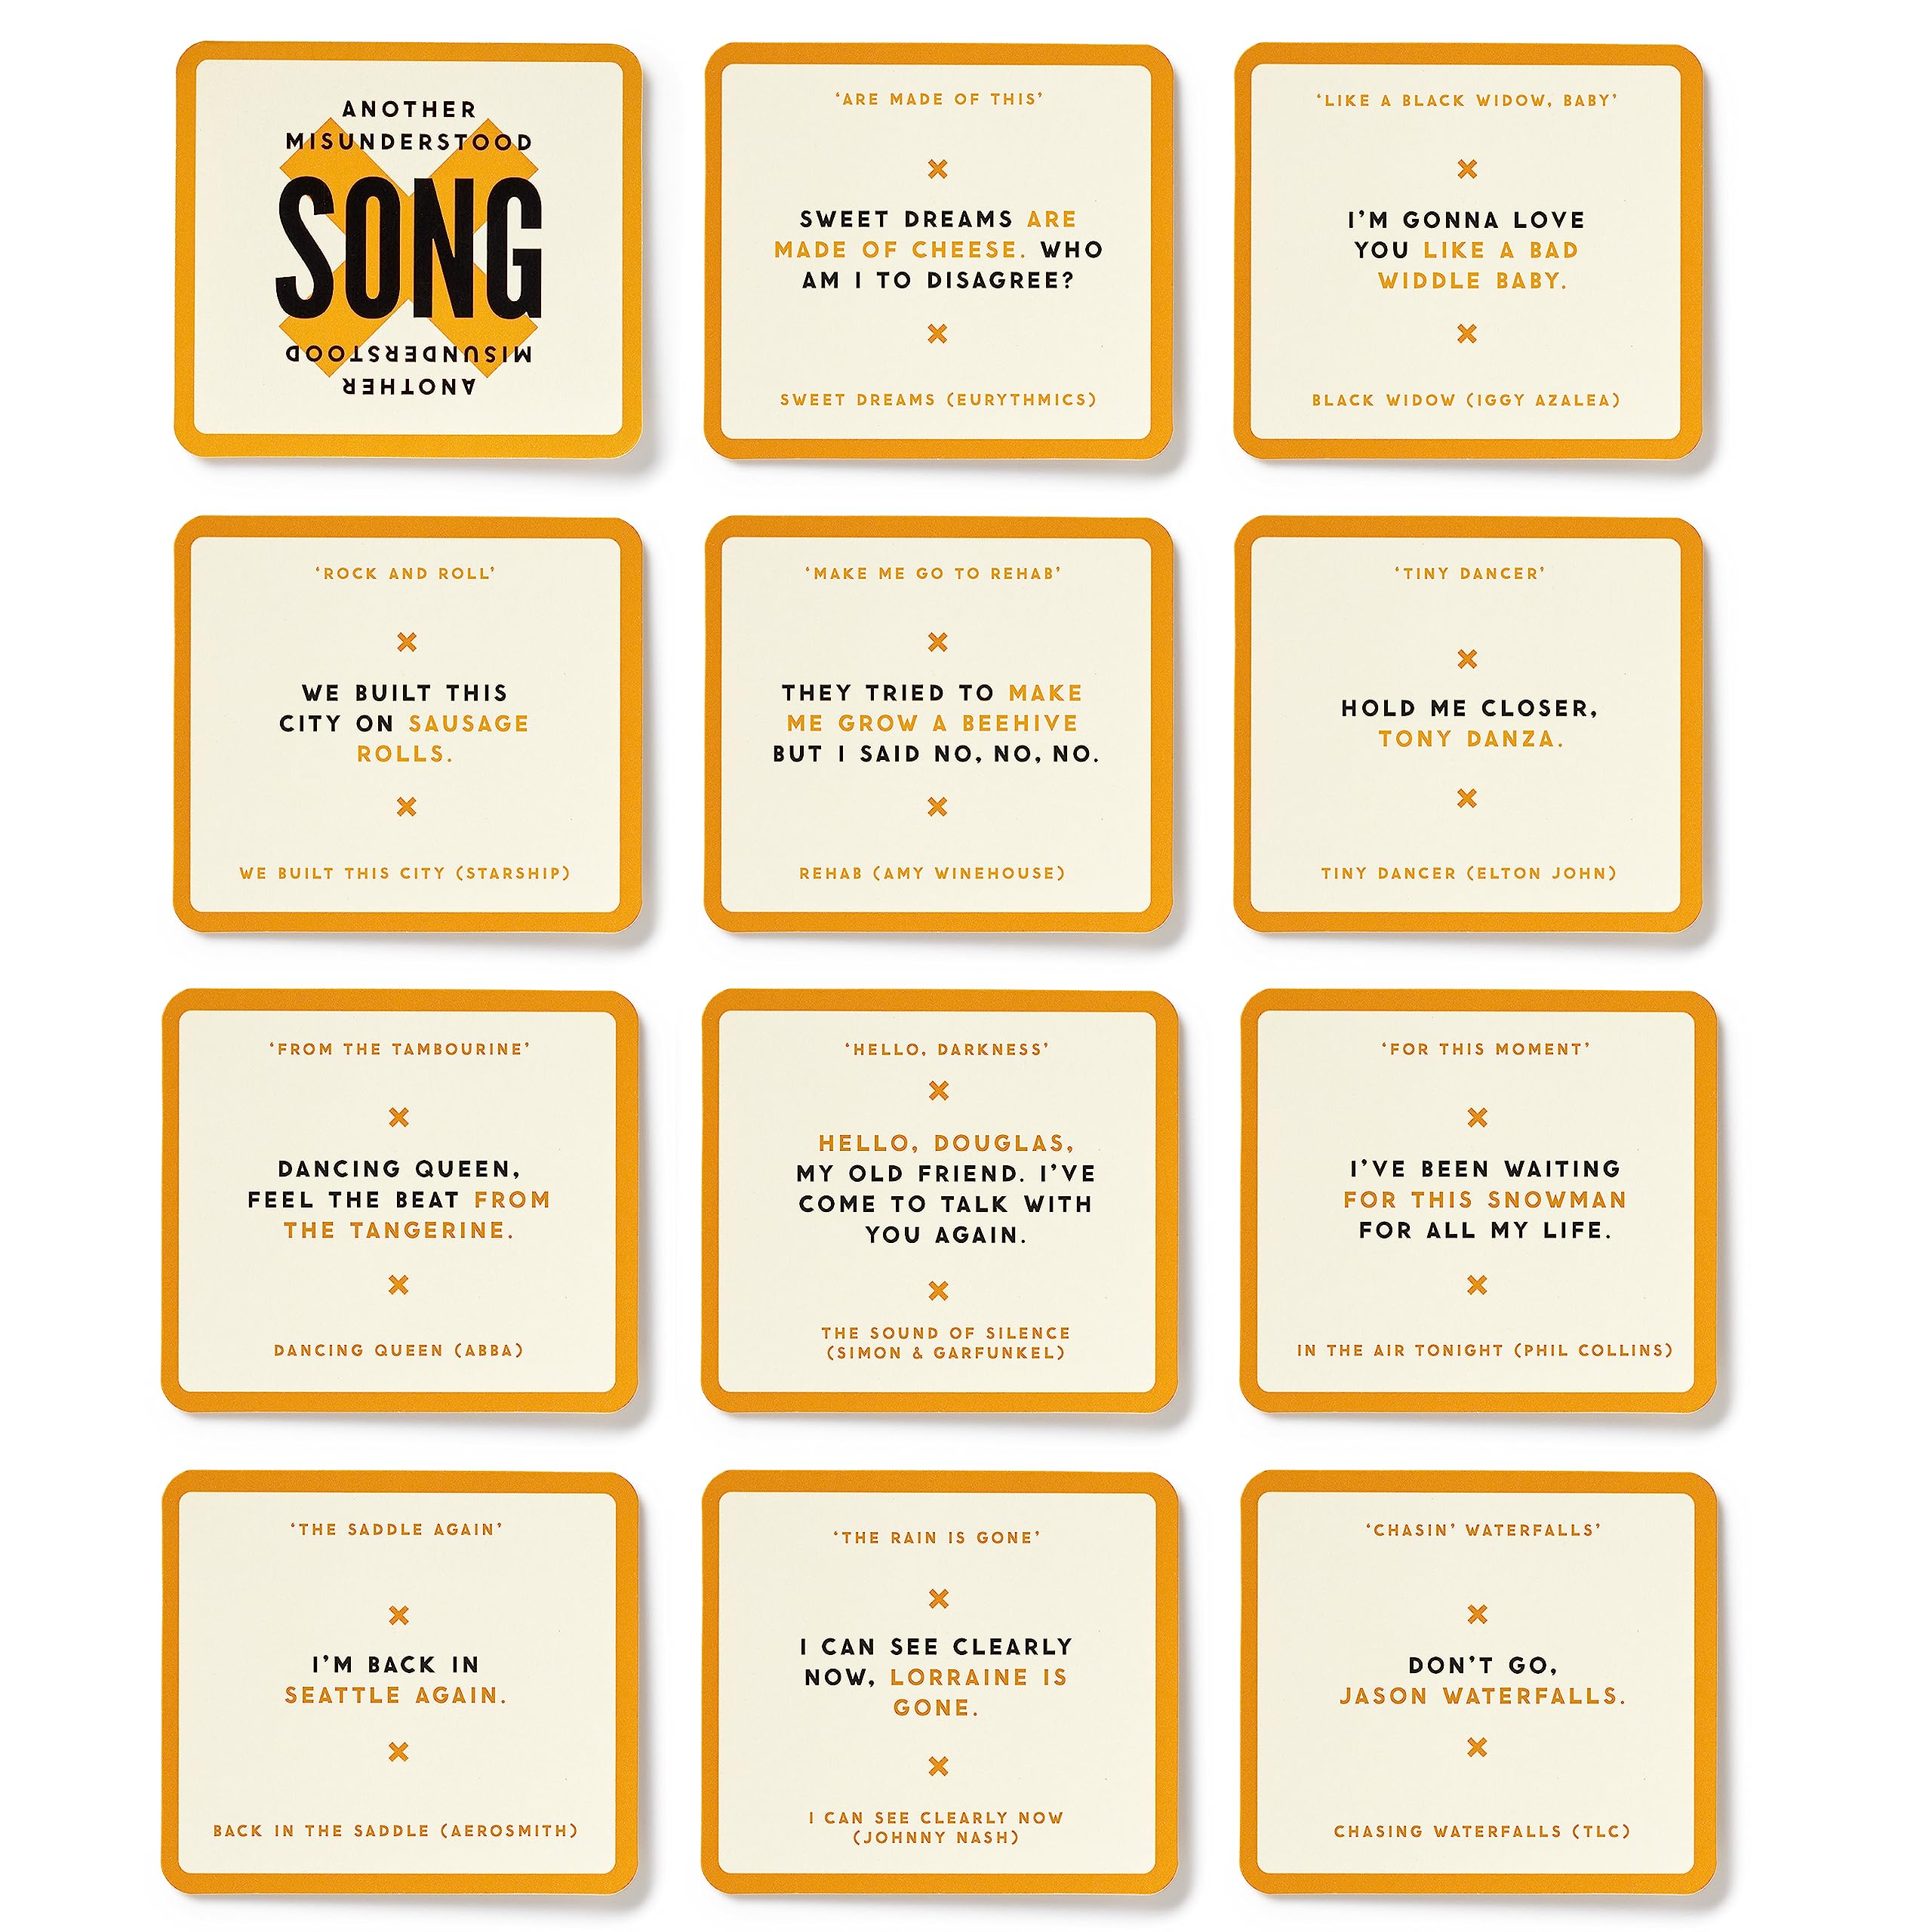 Brass Monkey Misunderstood Songs – Party Game with 300 Cards Featuring Uniquely Incorrect Lyrics of Songs, Suitable for 2-8 Players